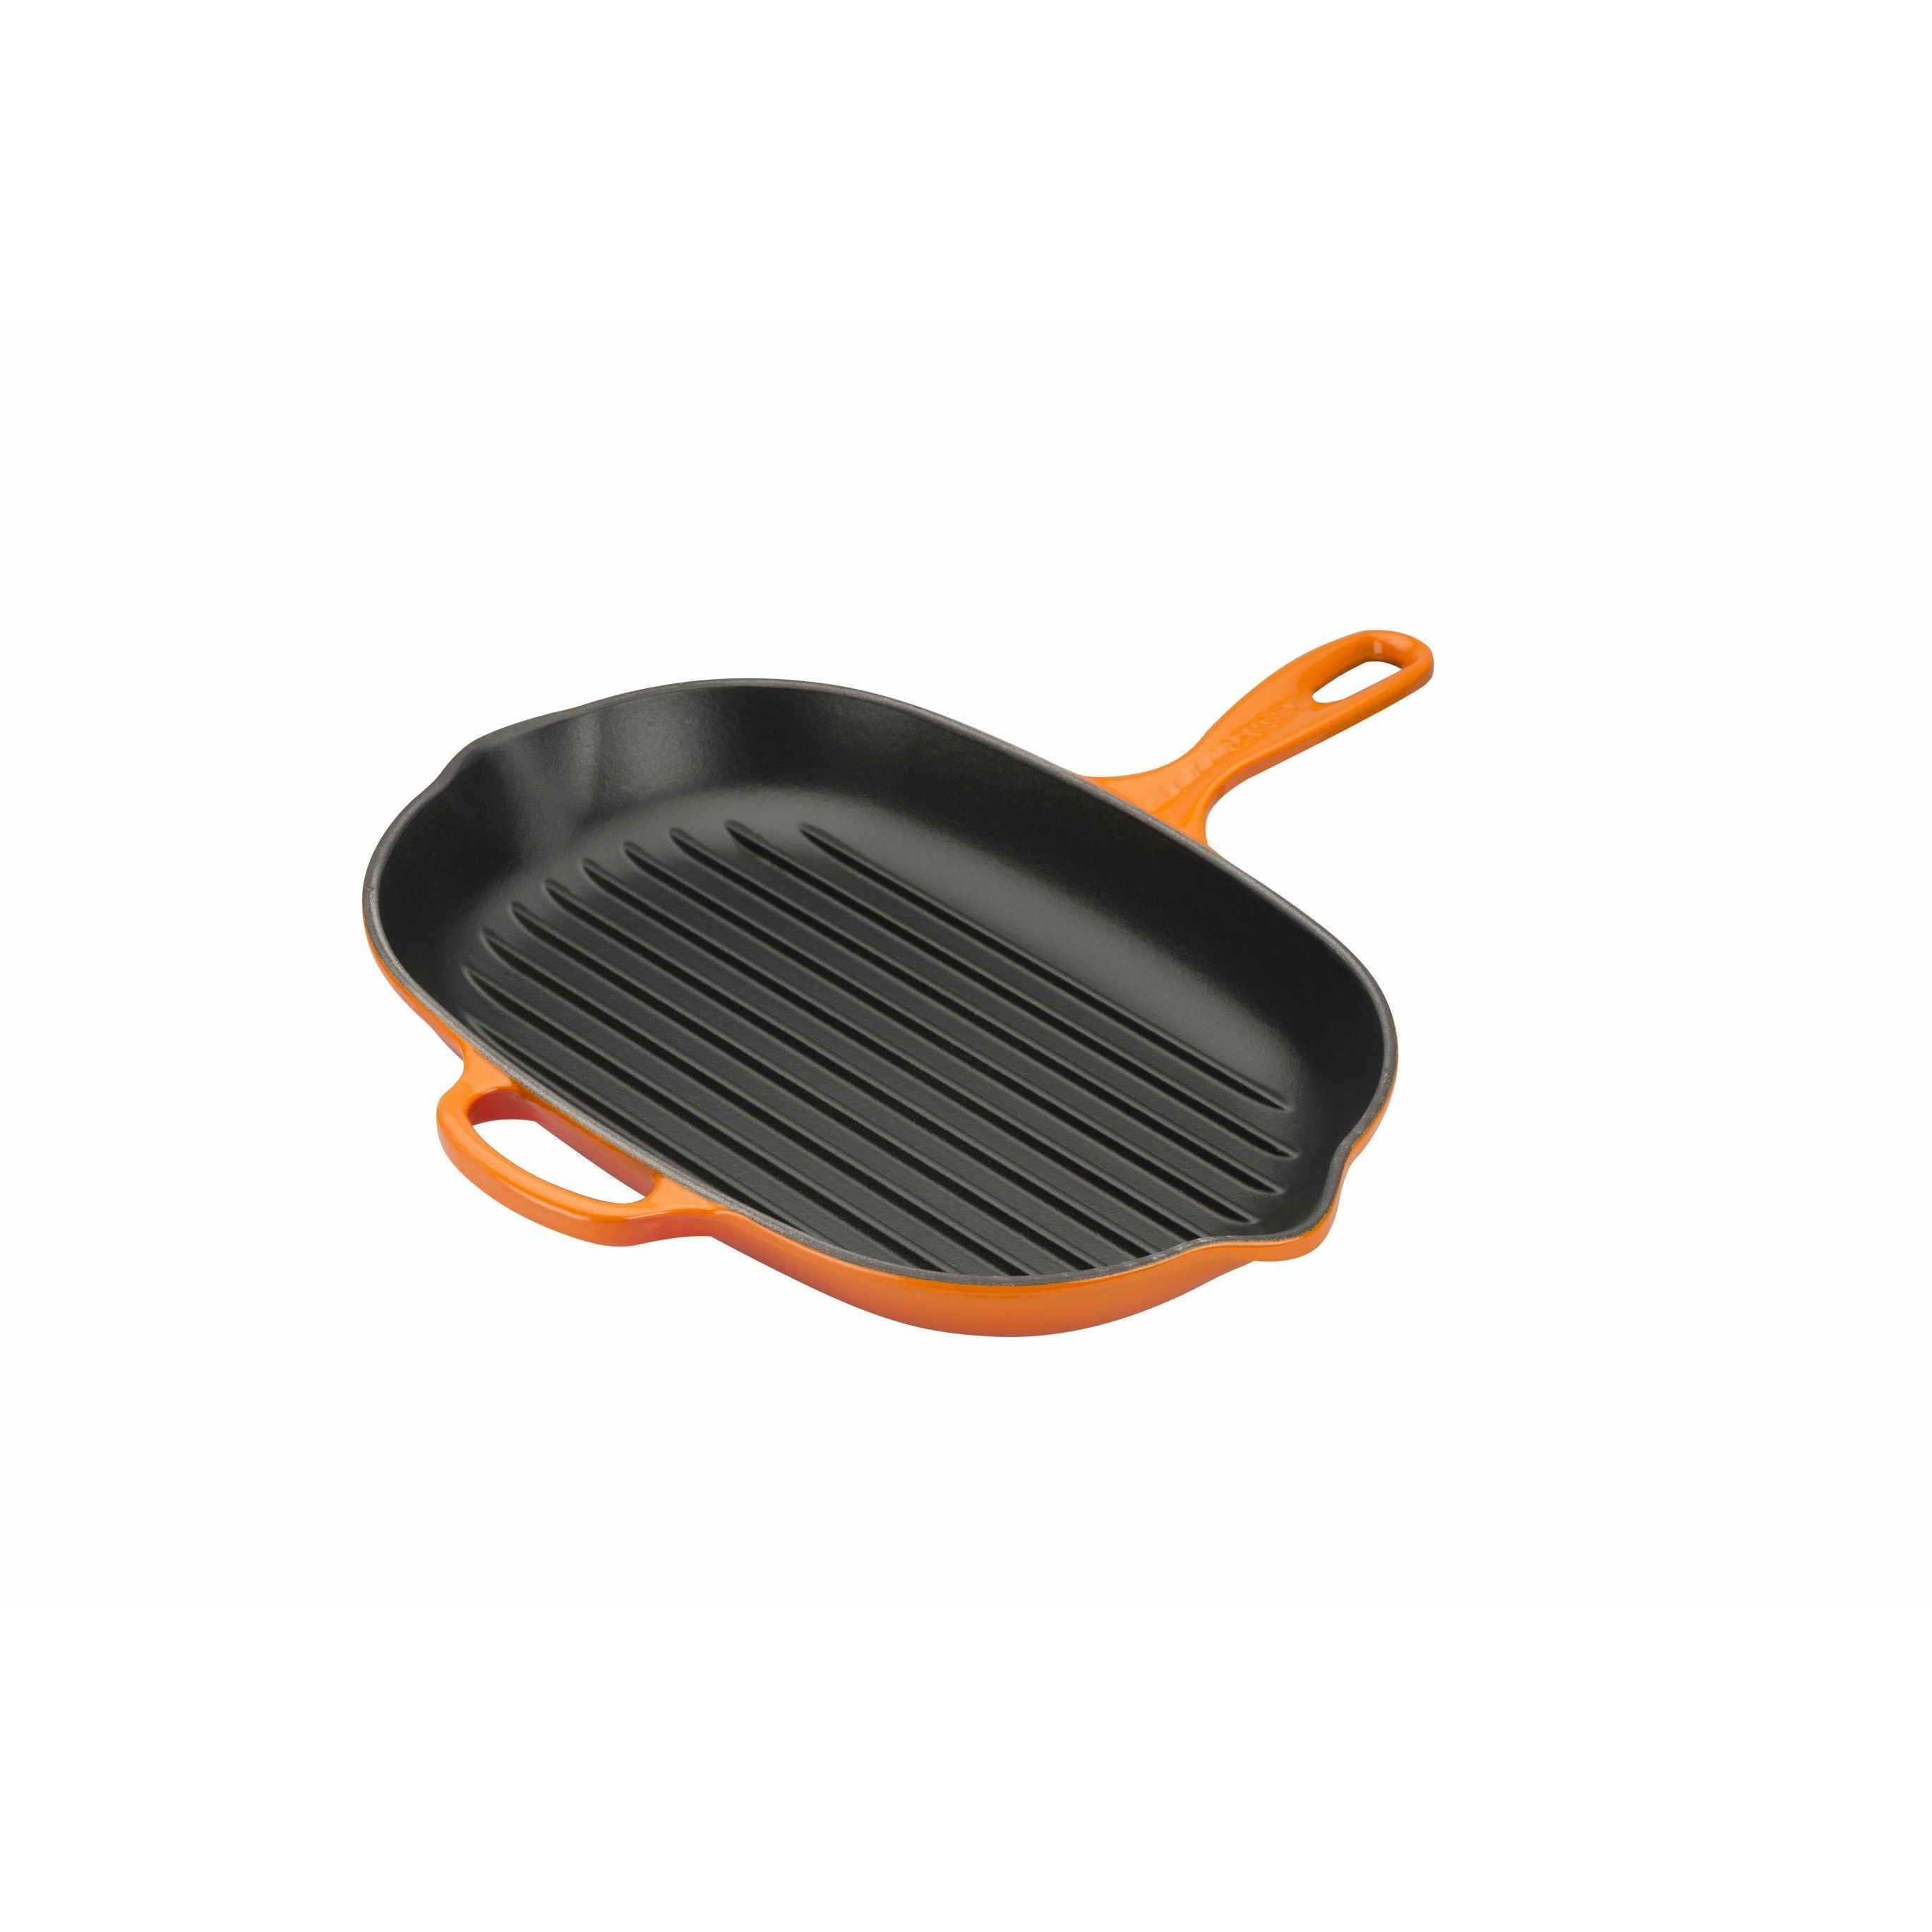 Le Creuset Nature Oval Grill Pan 32 Cm, Oven Red